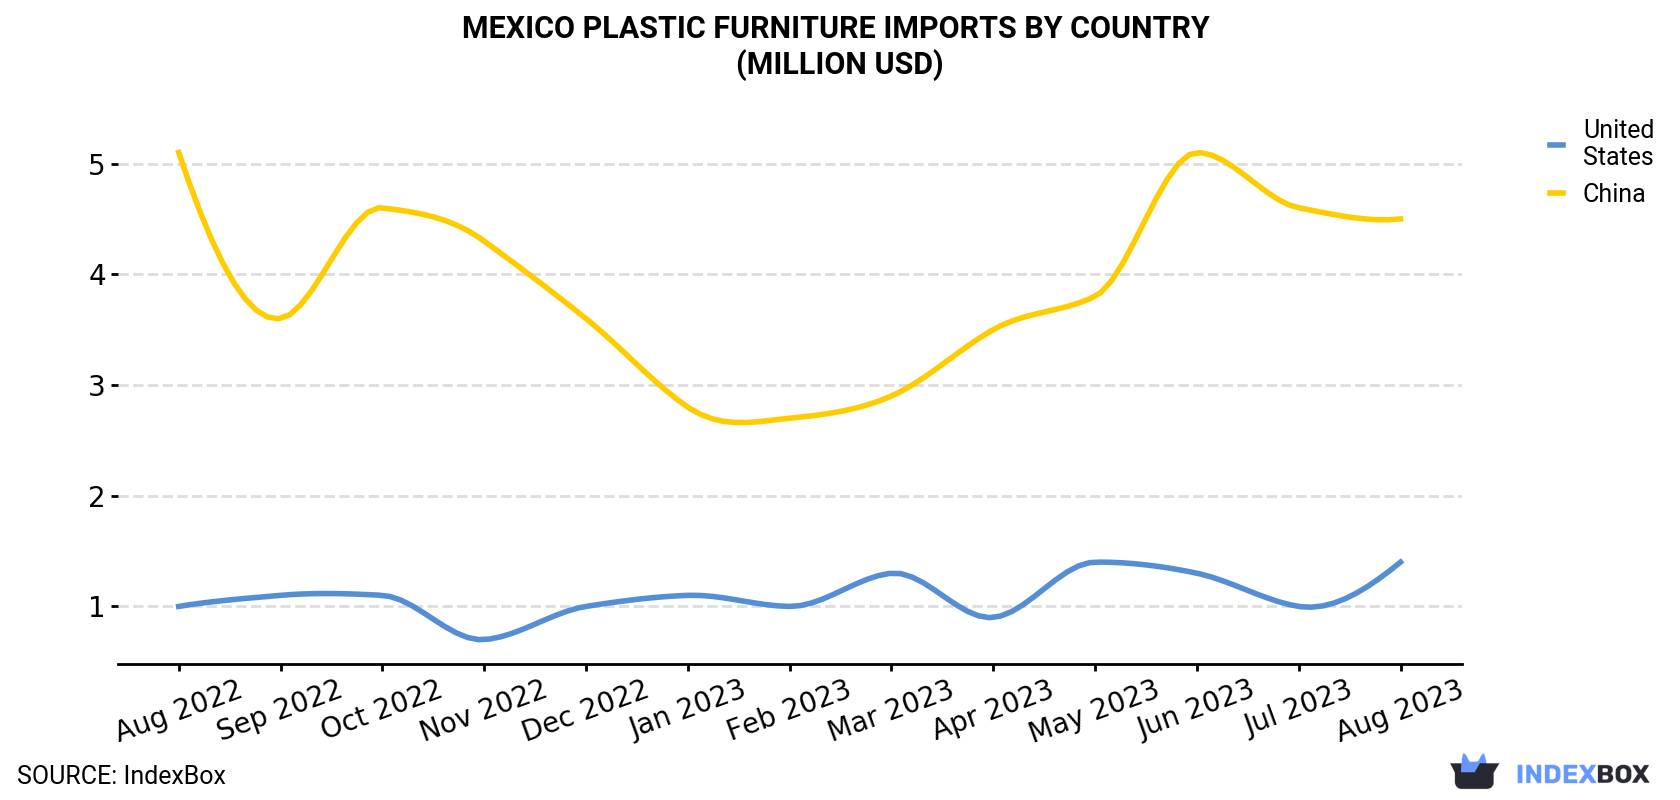 Mexico Plastic Furniture Imports By Country (Million USD)